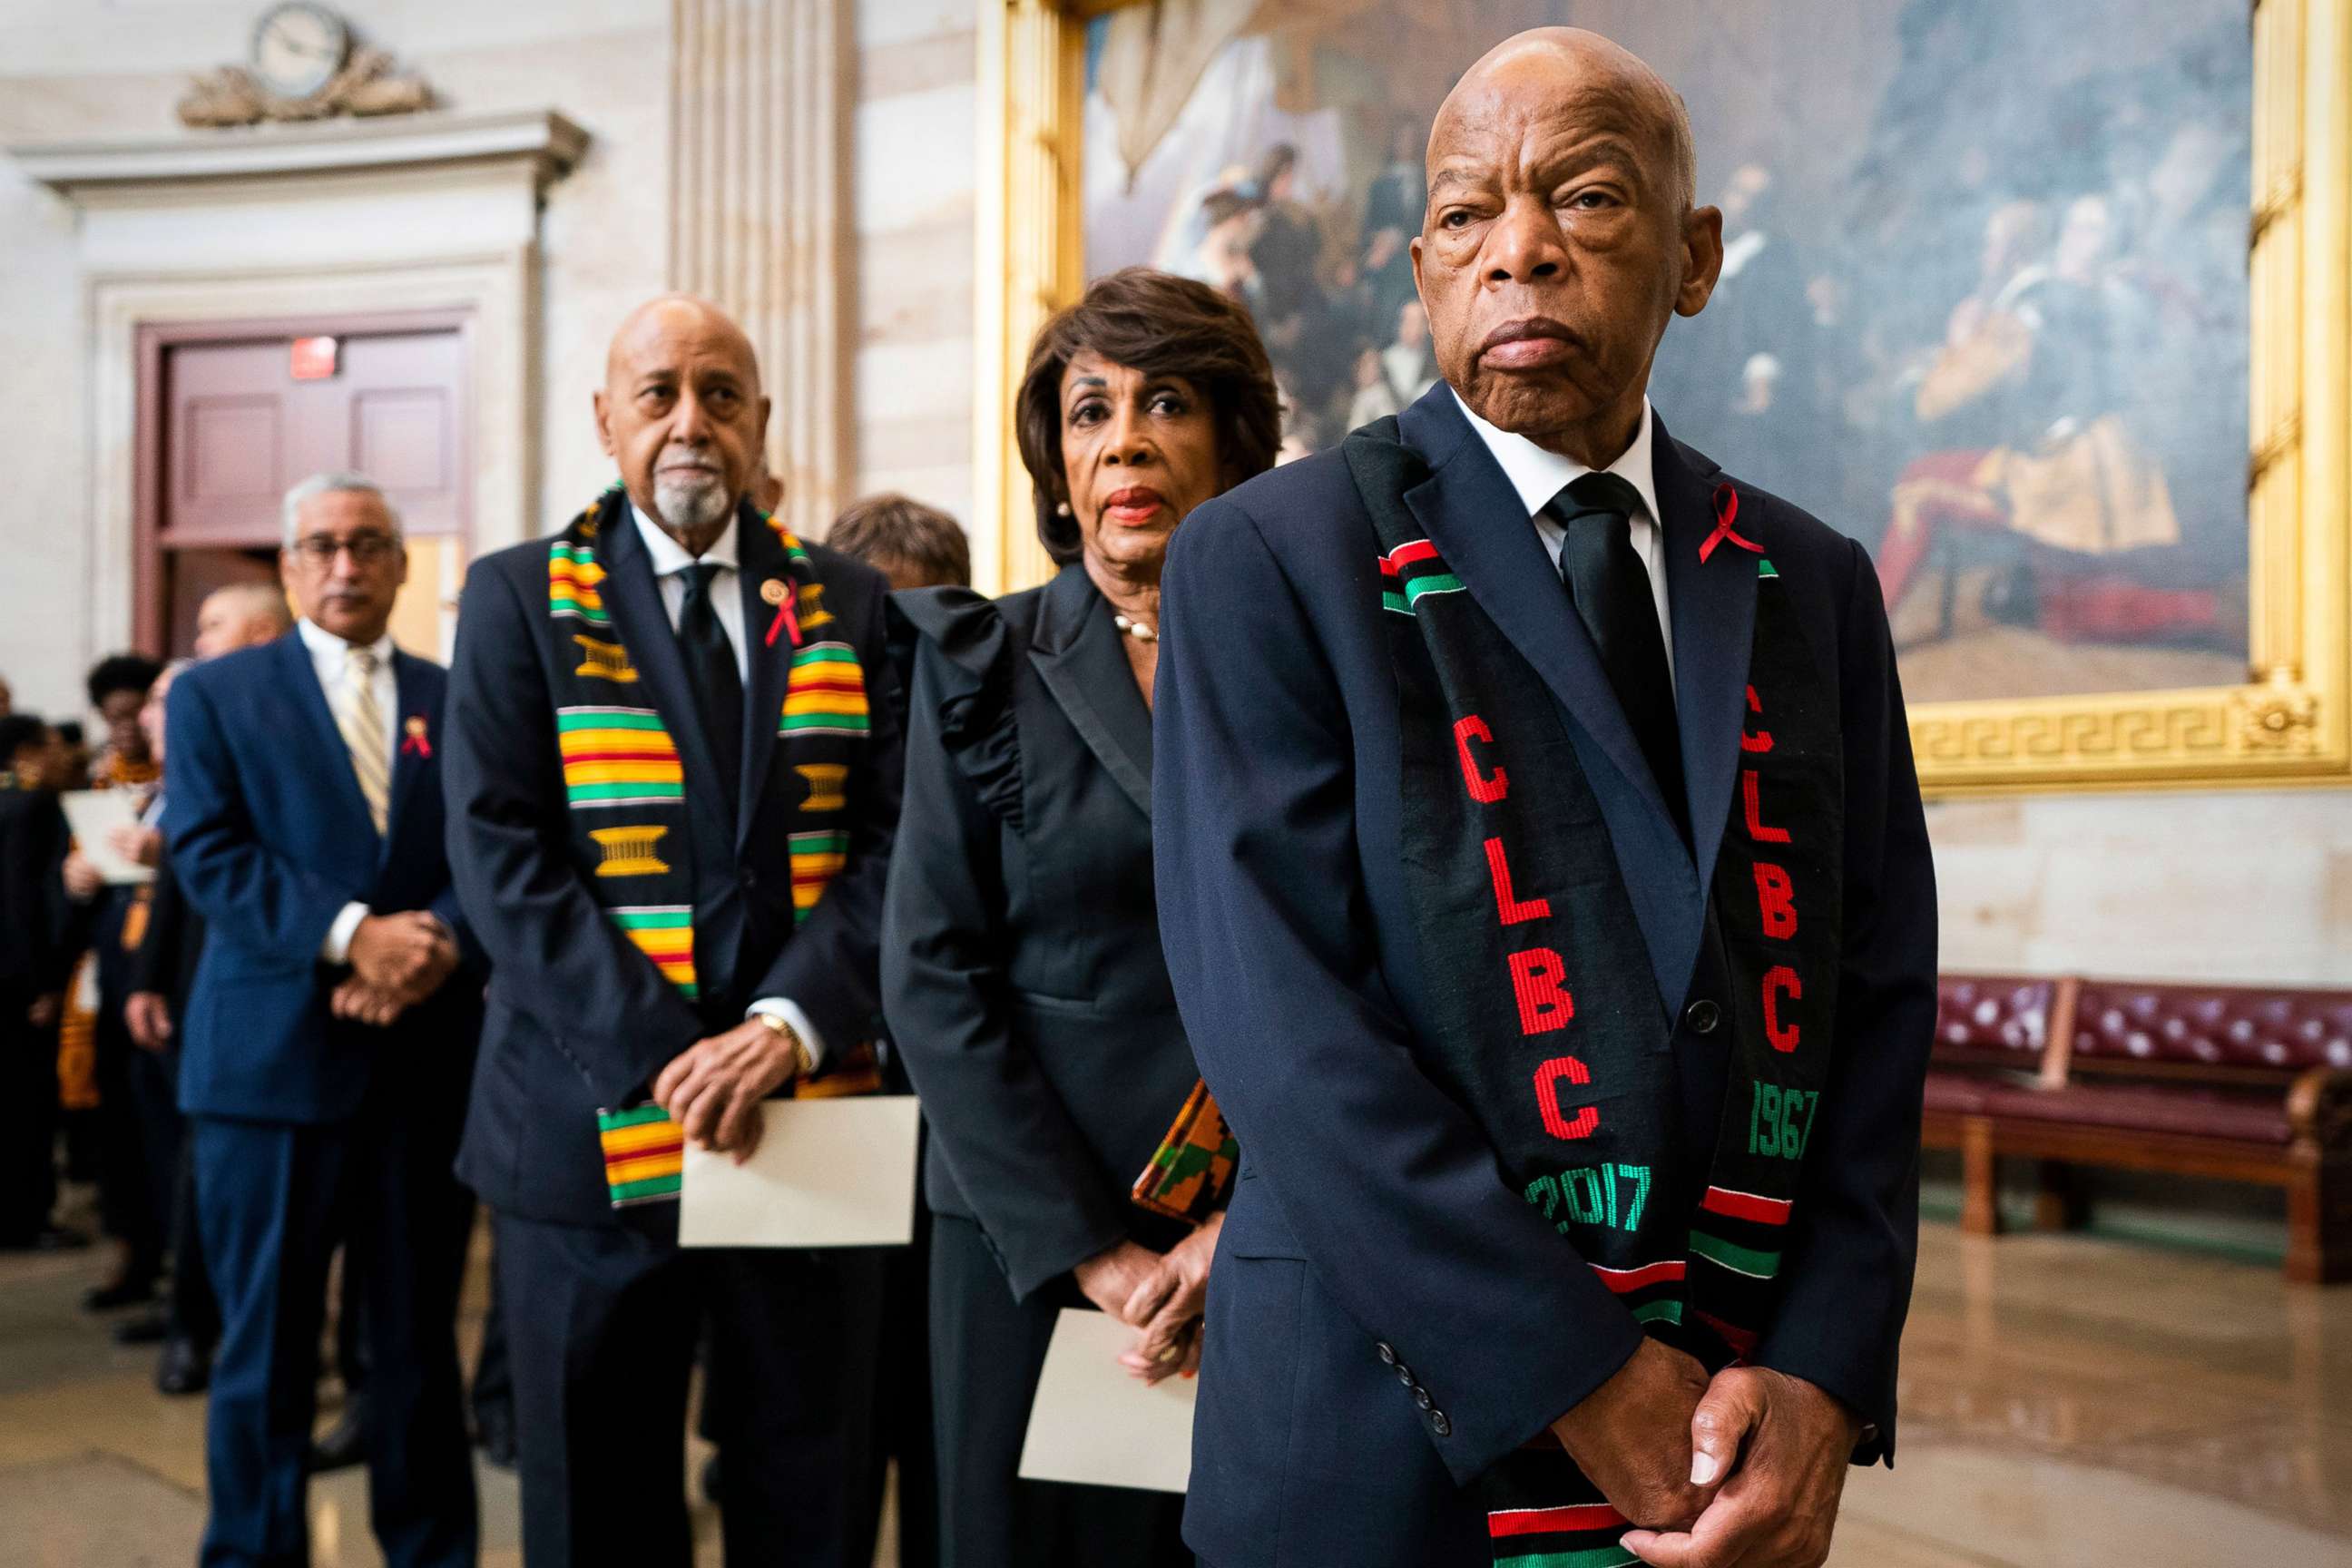 PHOTO: Rep. John Lewis, right, joins other members of the Congressional Black Caucus to await the casket of late Democratic Representative from Maryland Elijah Cummings in the Rotunda of the U.S. Capitol in Washington, D.C., Oct. 24, 2019.